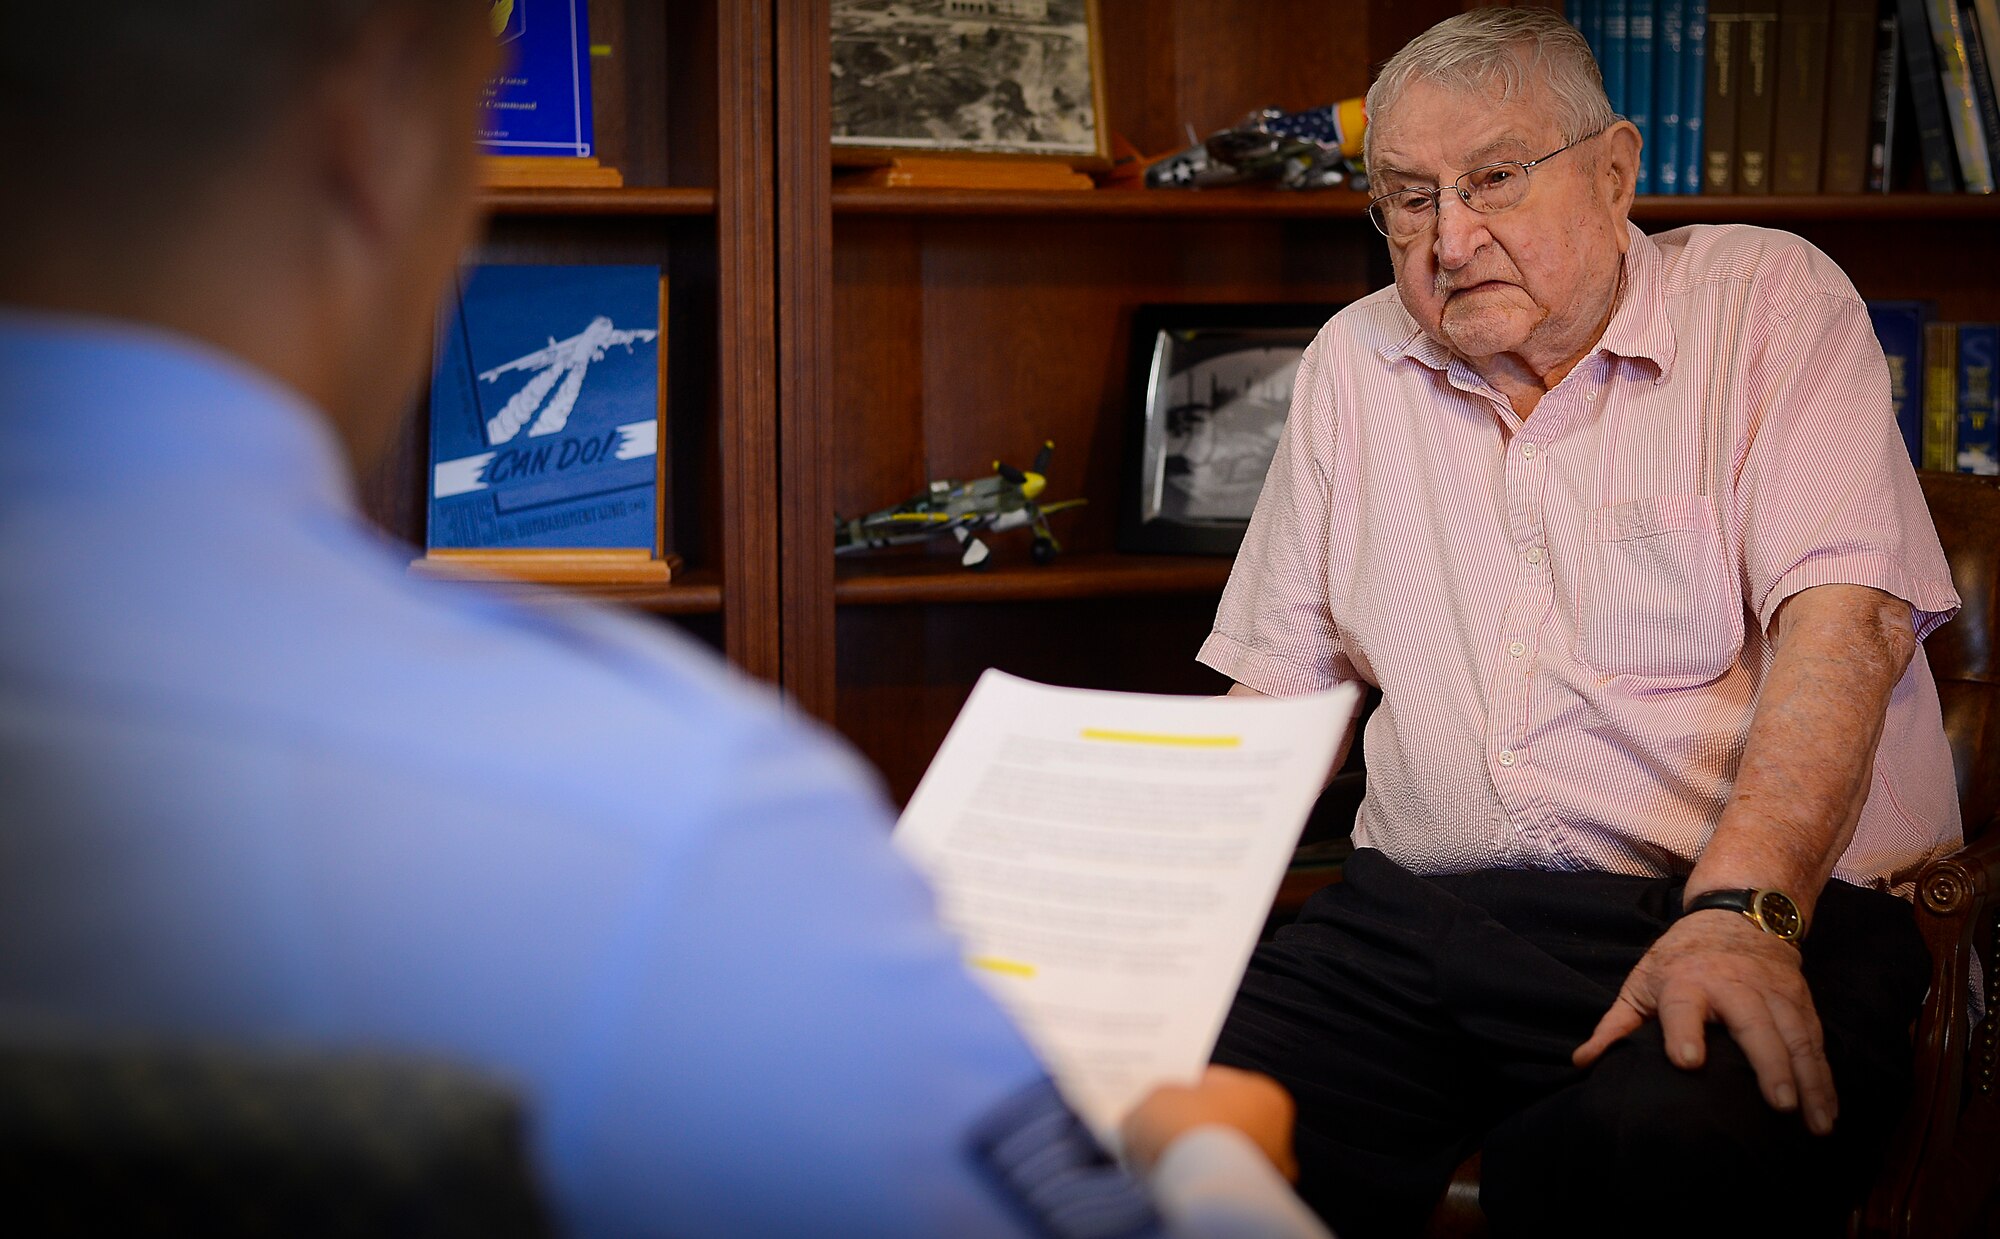 Technical Sgt. Brandon Shapiro interviews retired Col. Harry Buzzett, a WWII, Korean War and Vietnam War veteran, Nov. 30, 2015 at MacDill Air Force Base, Fla. Buzzett is a WestPoint graduate who fought the Germans, Chinese, and Vietcong on the front lines of battle. (U.S. Air Force photo by Airman 1st Class Brad Tipton)  